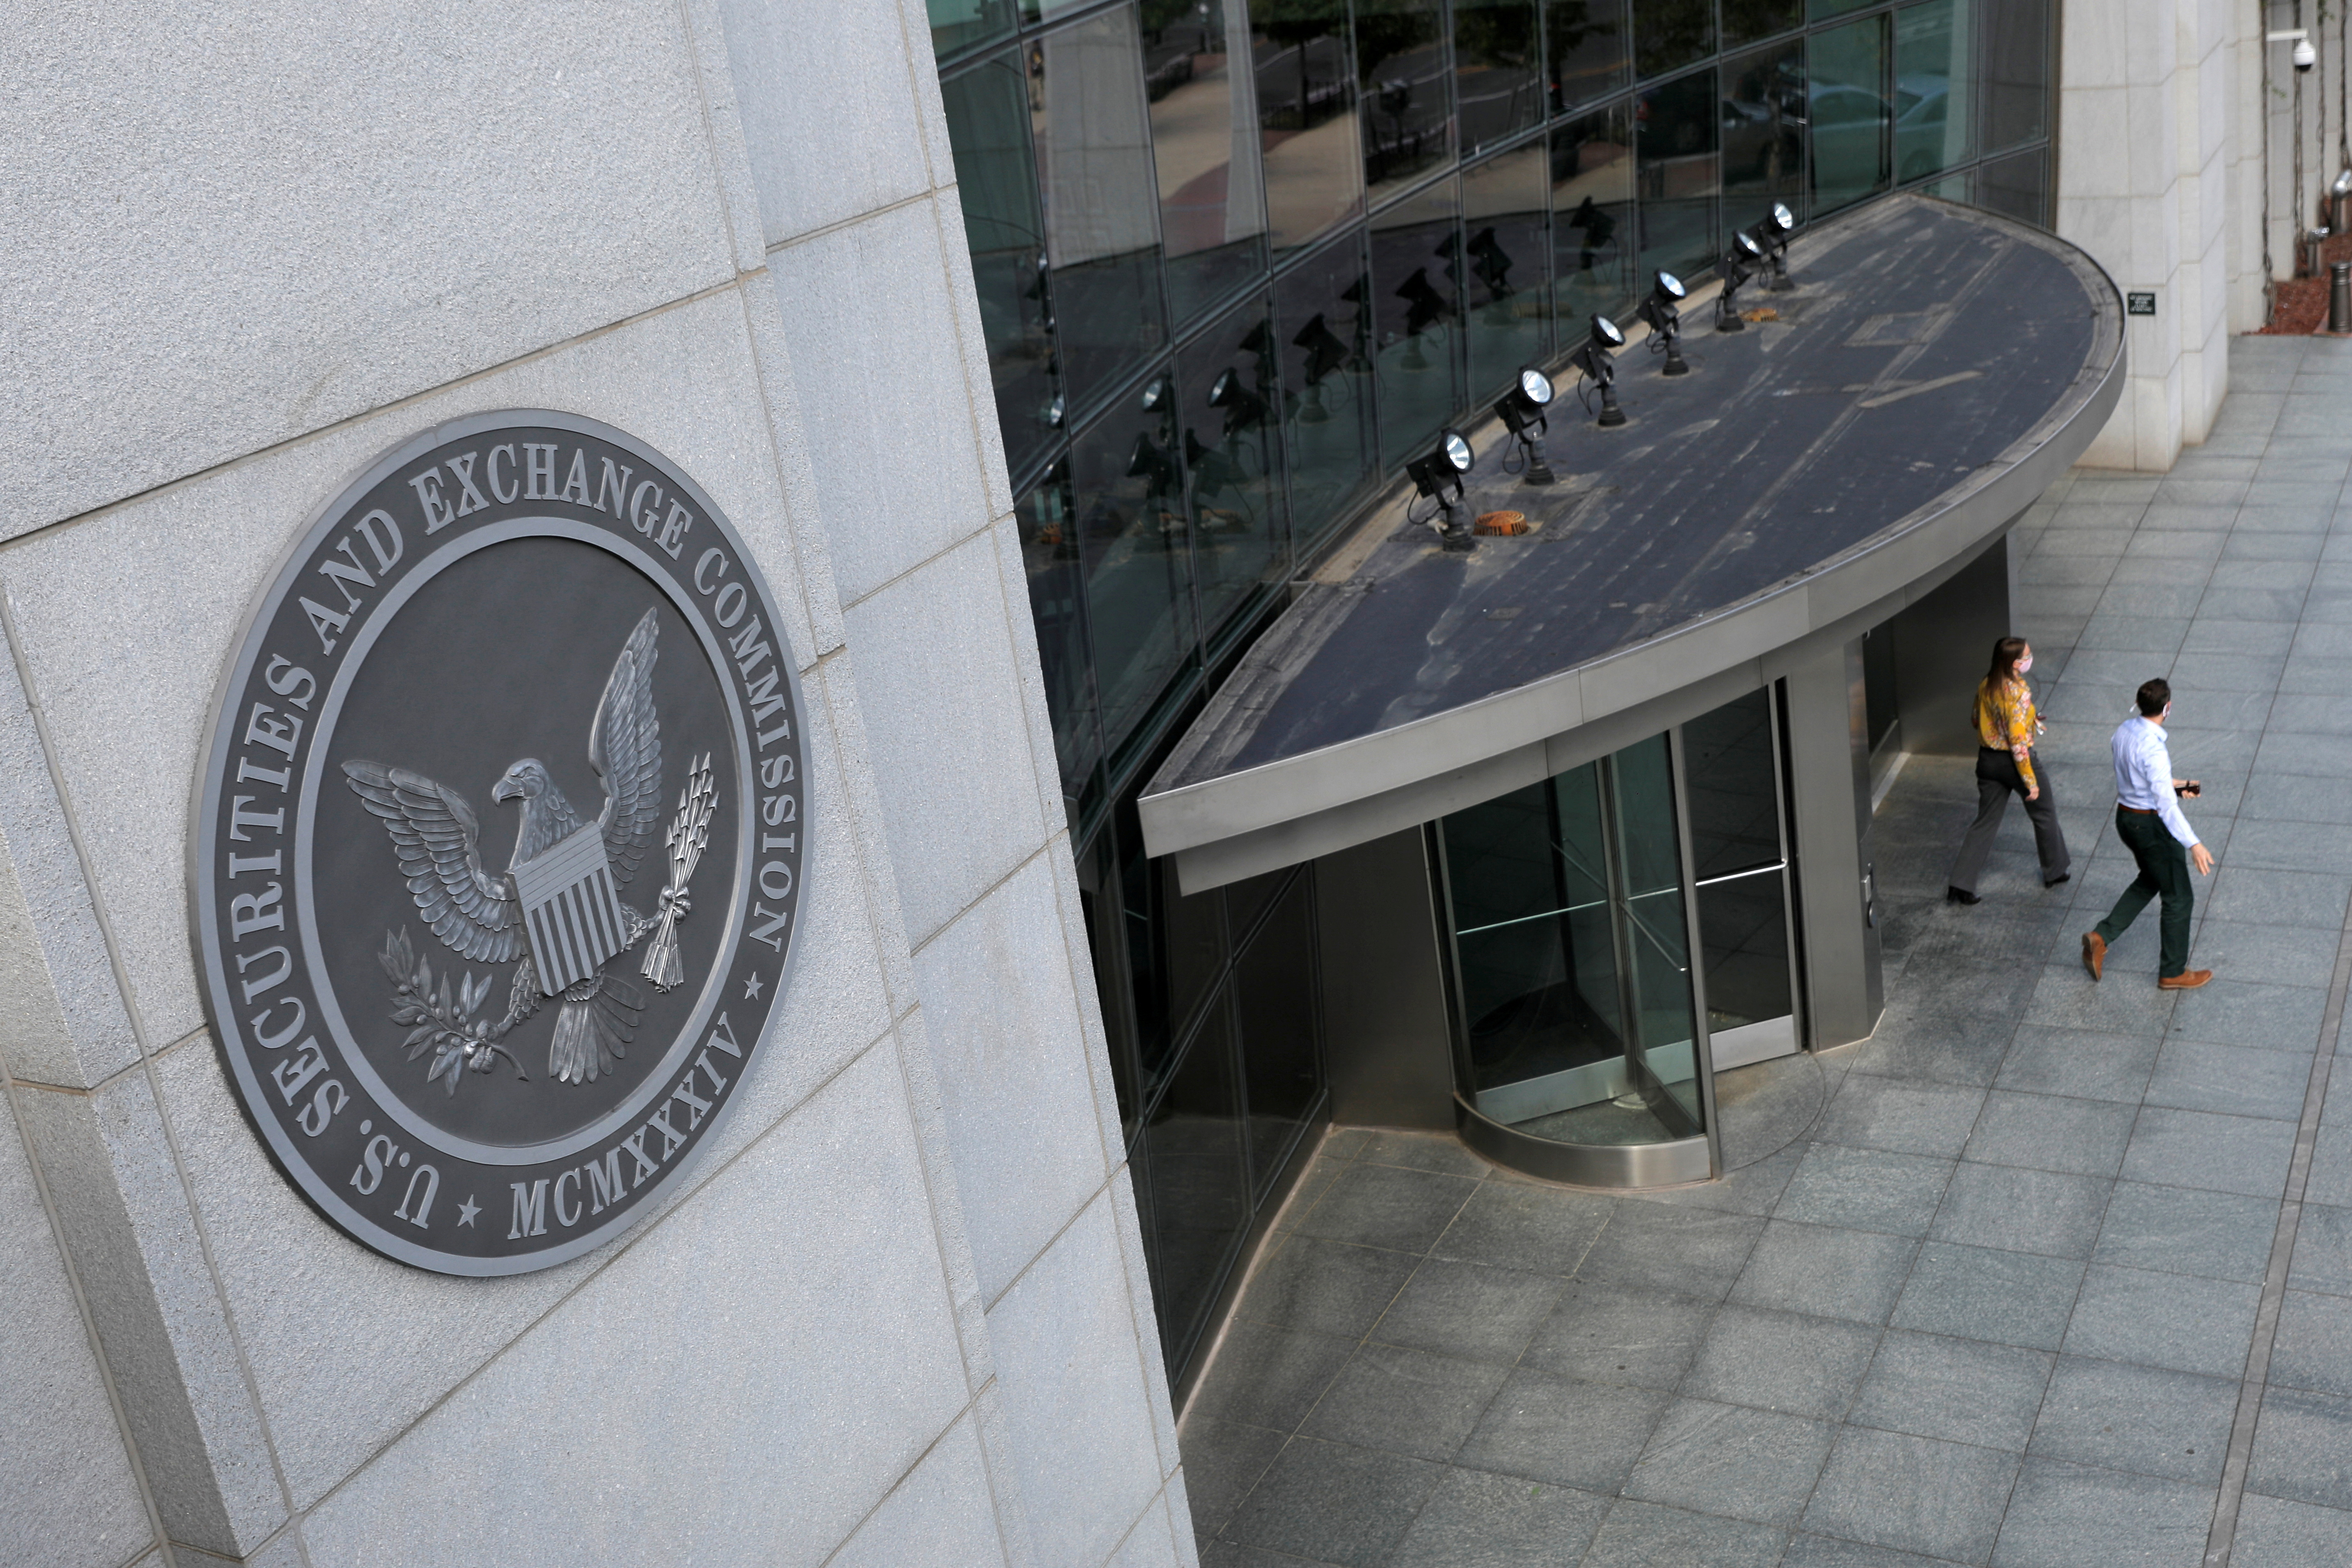  the headquarters of the U.S. Securities and Exchange Commission (SEC) in Washington, D.C.